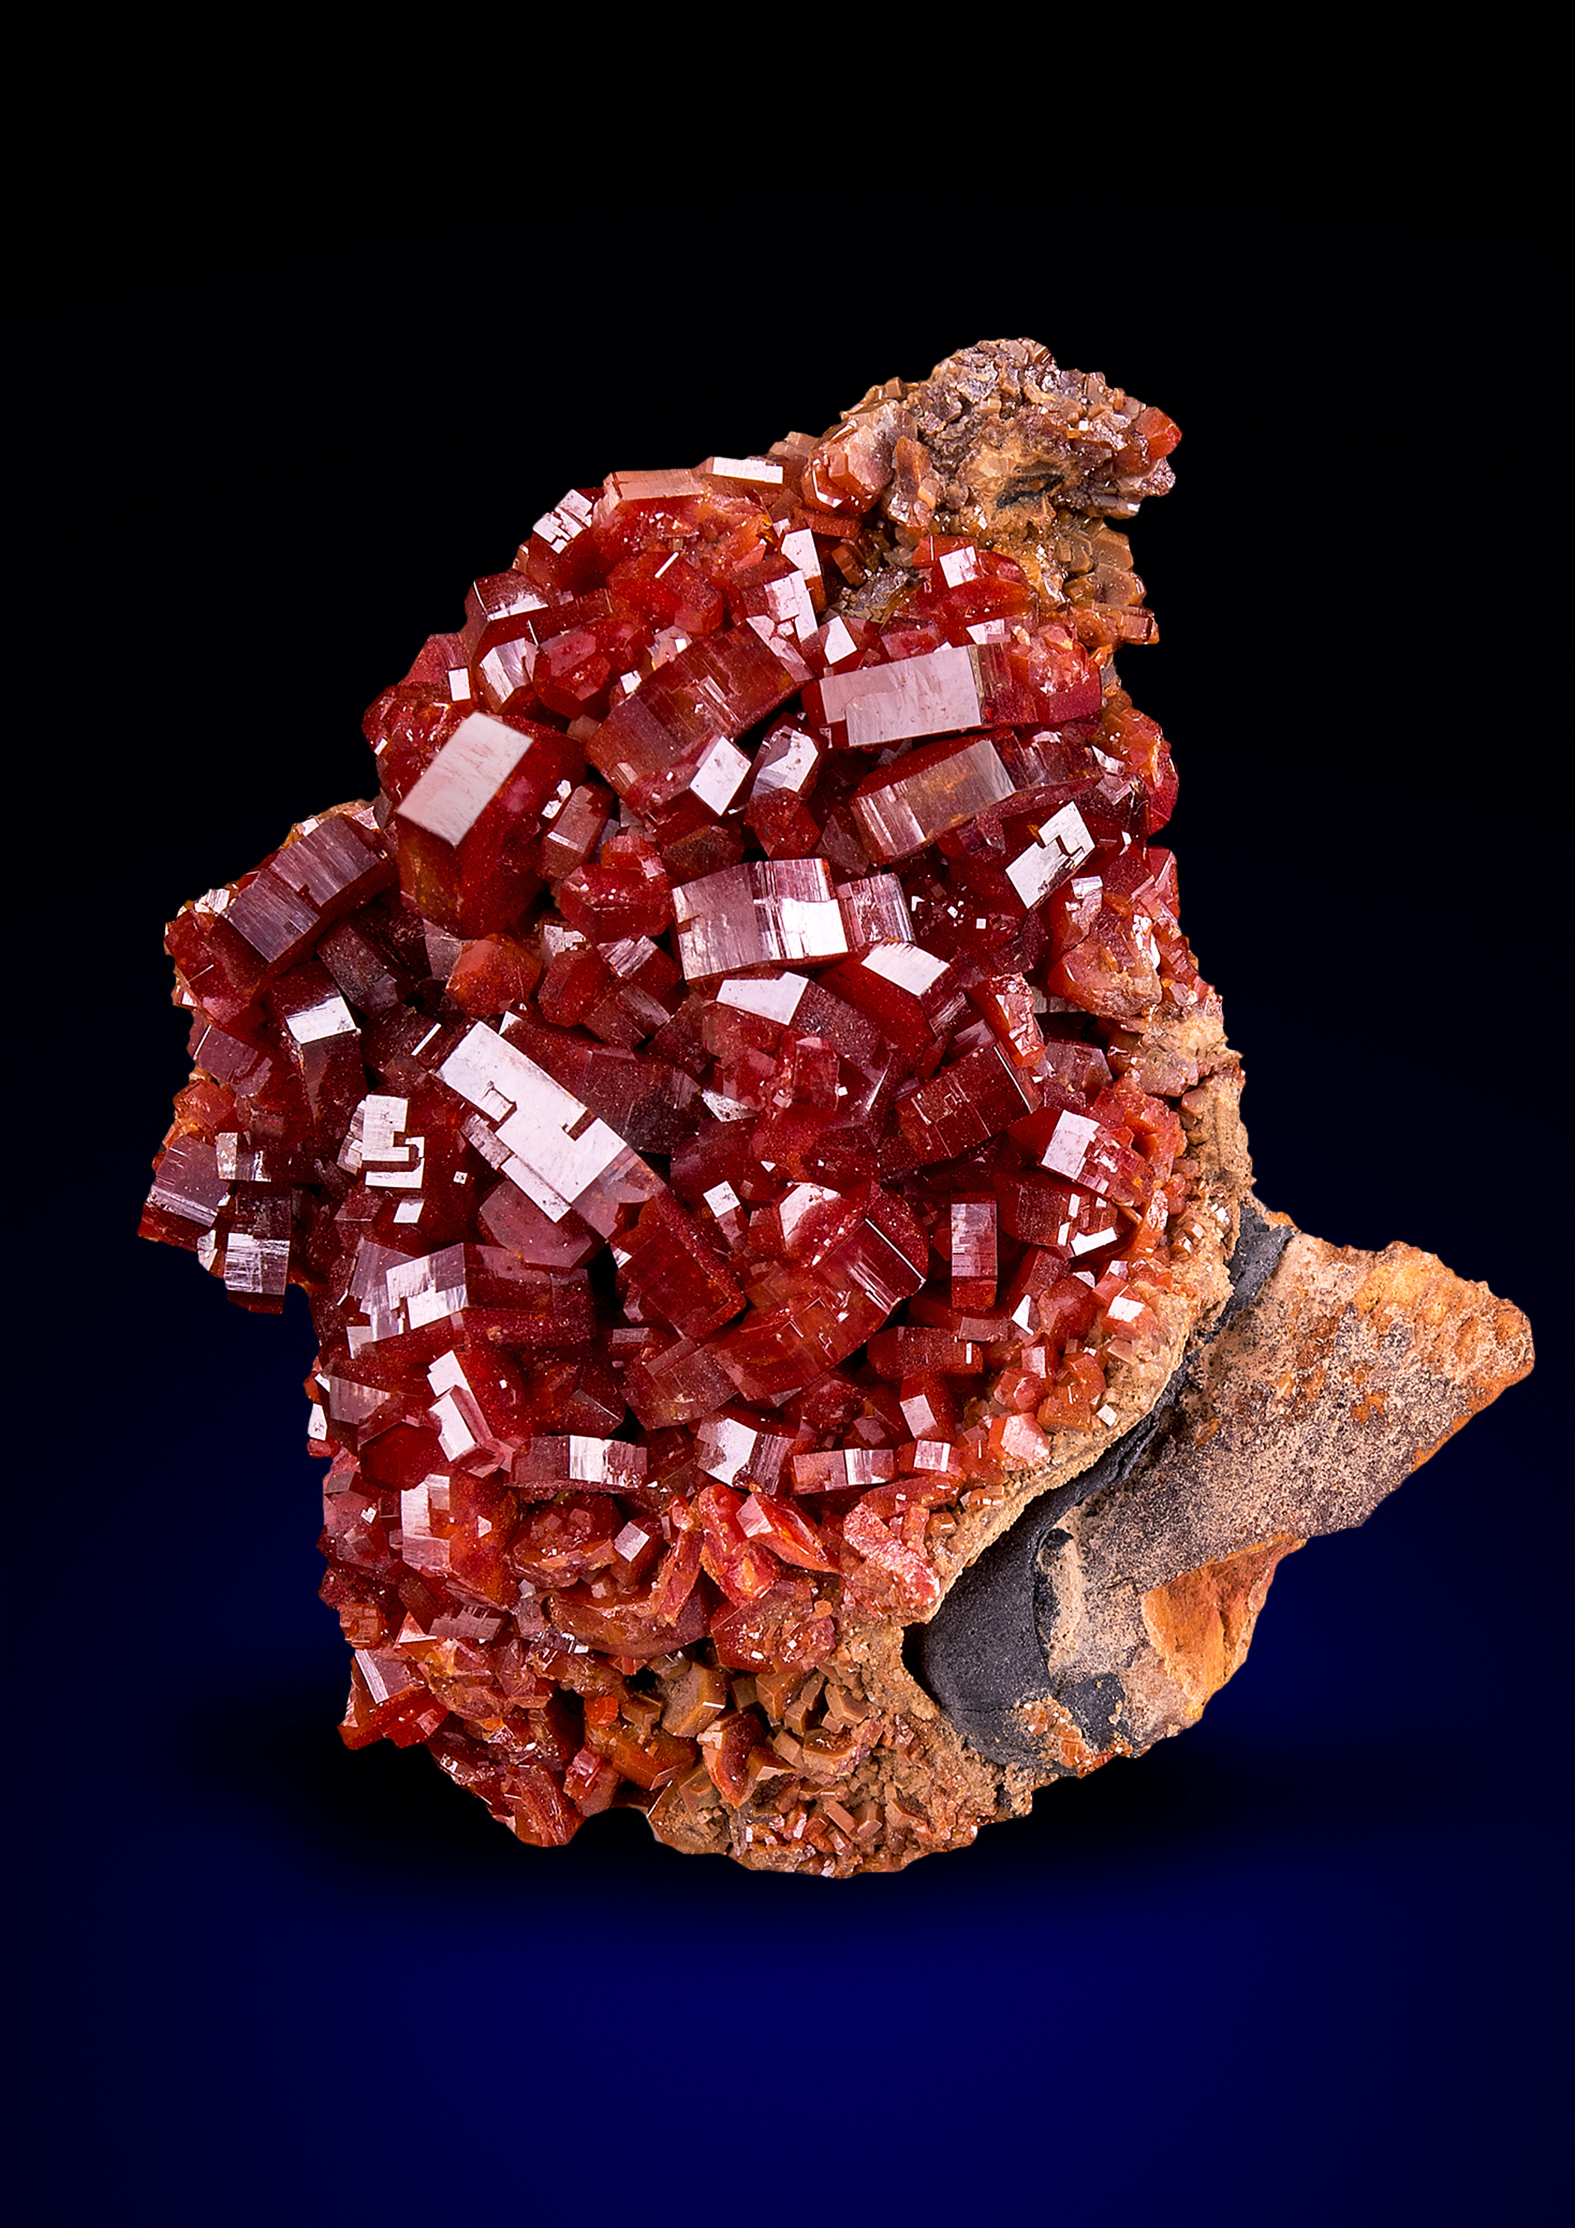 Collections Vanadinite with Barite from Morocco,Morocco Minerals and Crystals,Vanadinite Crystal,red color,Cluster Vanadinite,Crystal Home